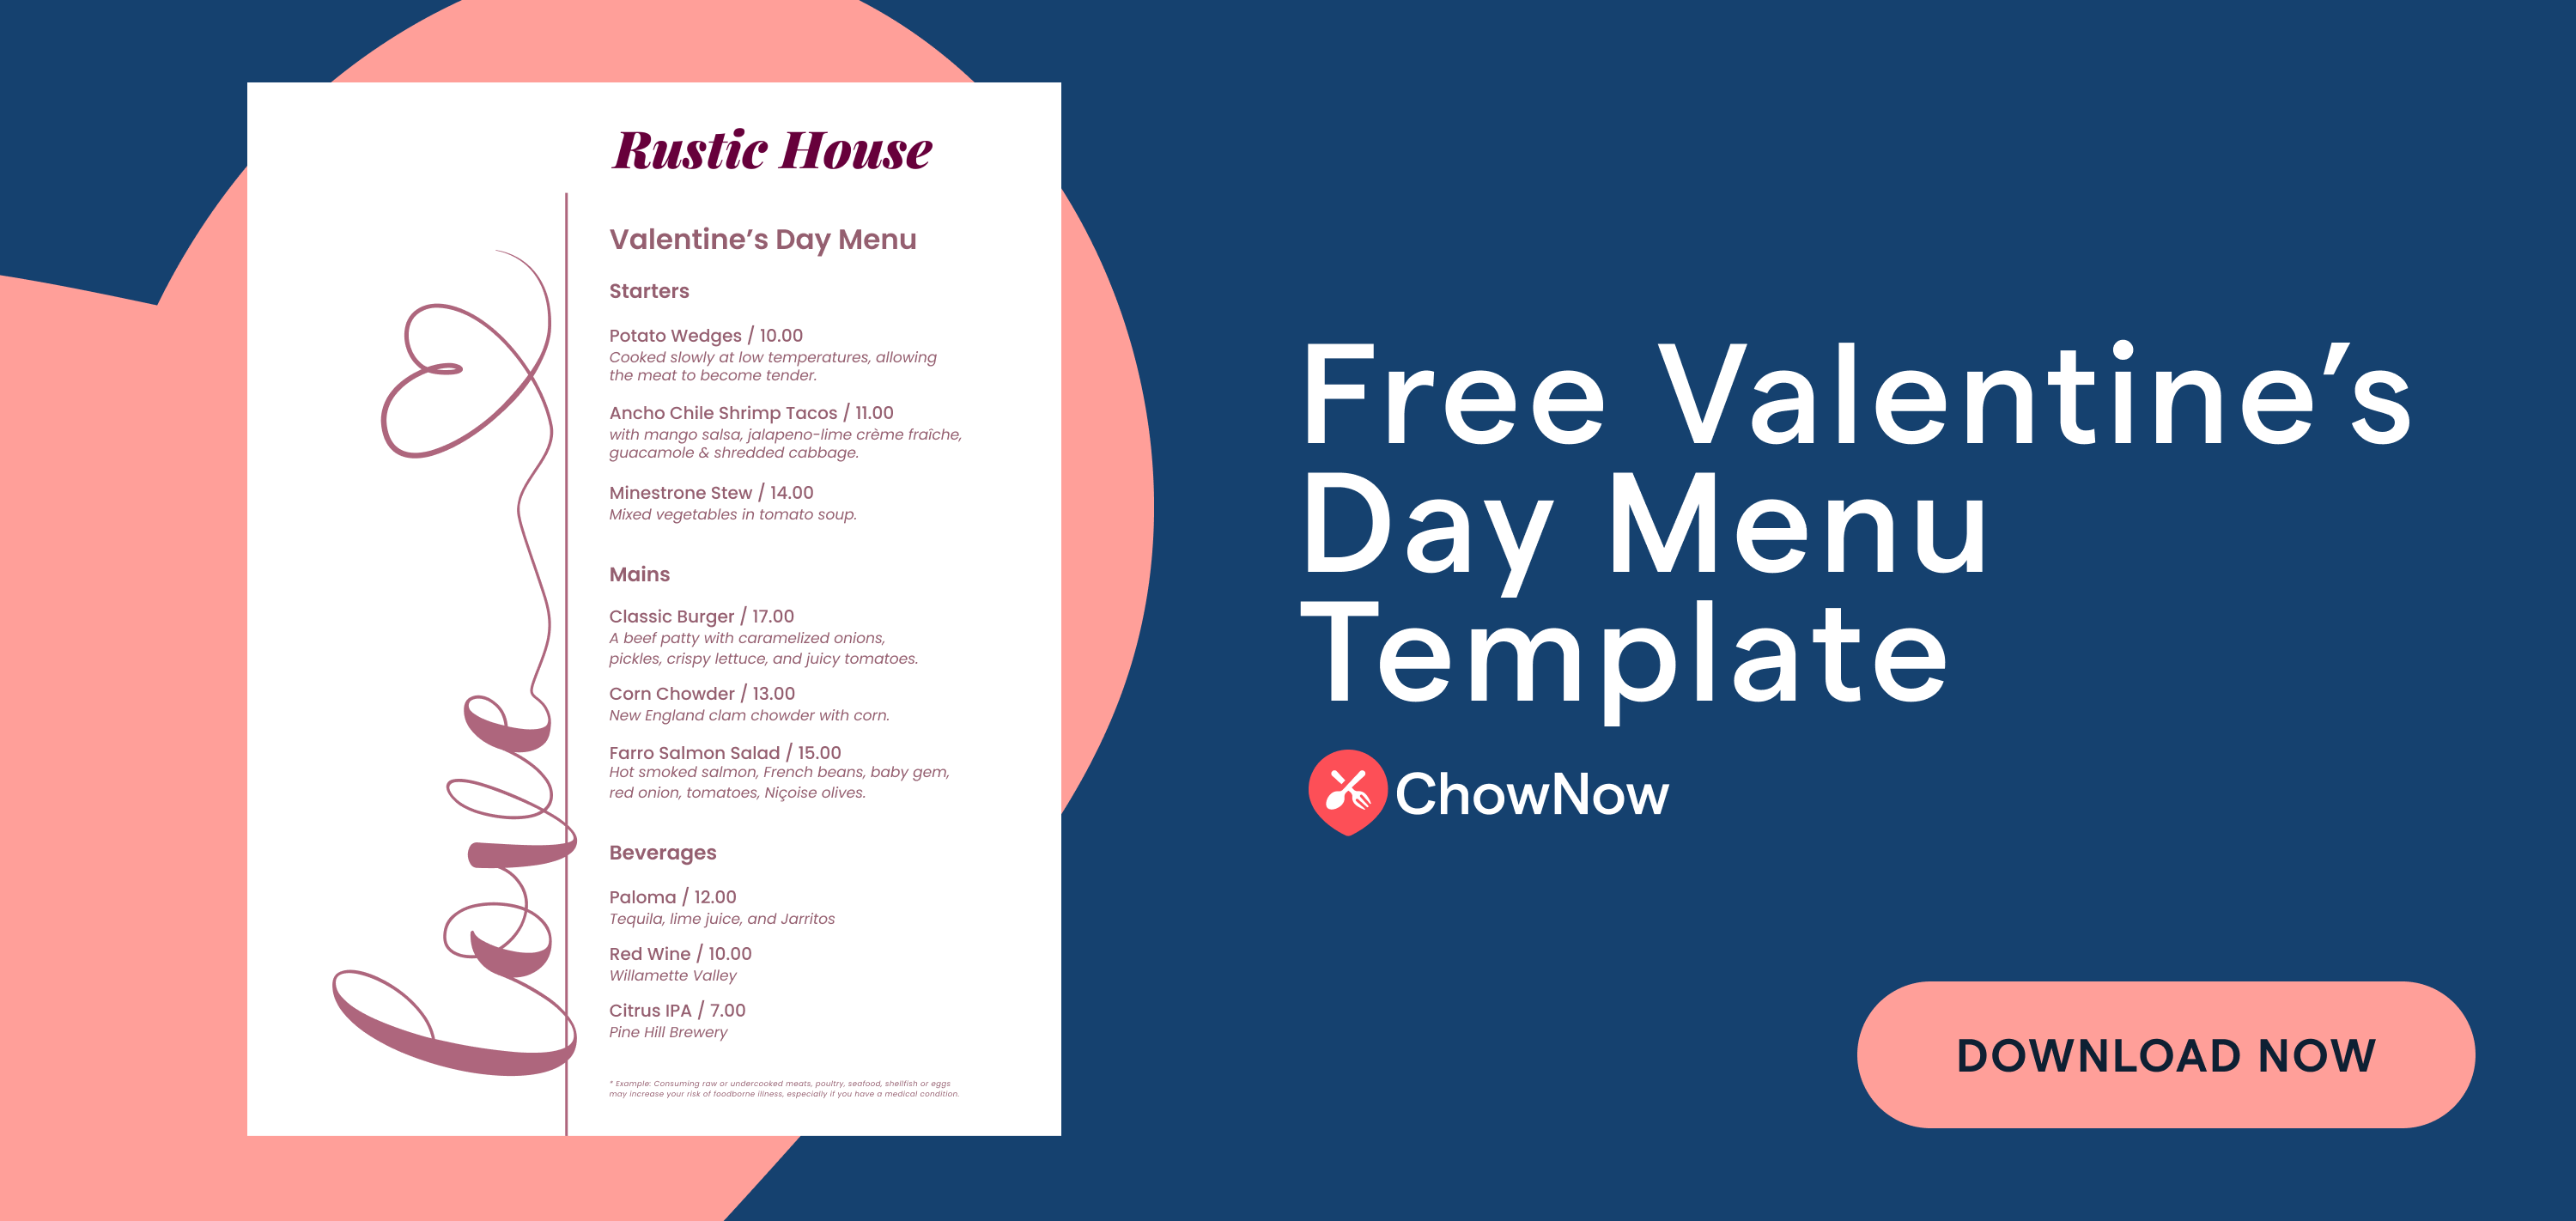 Click on this link to download a customizable menu template for Valentine's Day